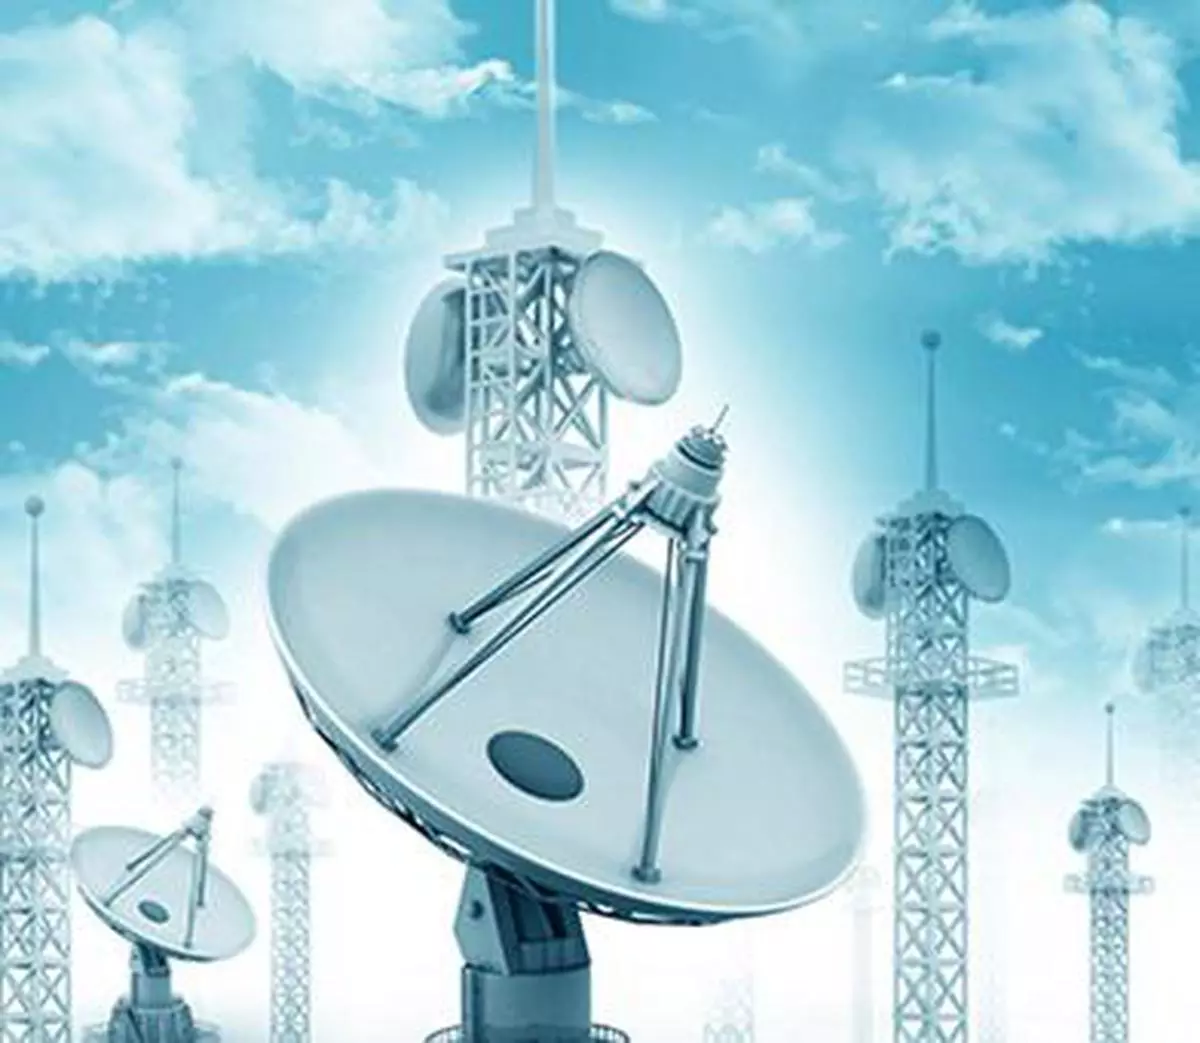 The use case for satellite broadband is the strongest in rural areas where it can help achieve connectivity at much lower costs, says Mansi Kedia, a fellow at ICRIER, and a telecoms and internet expert 